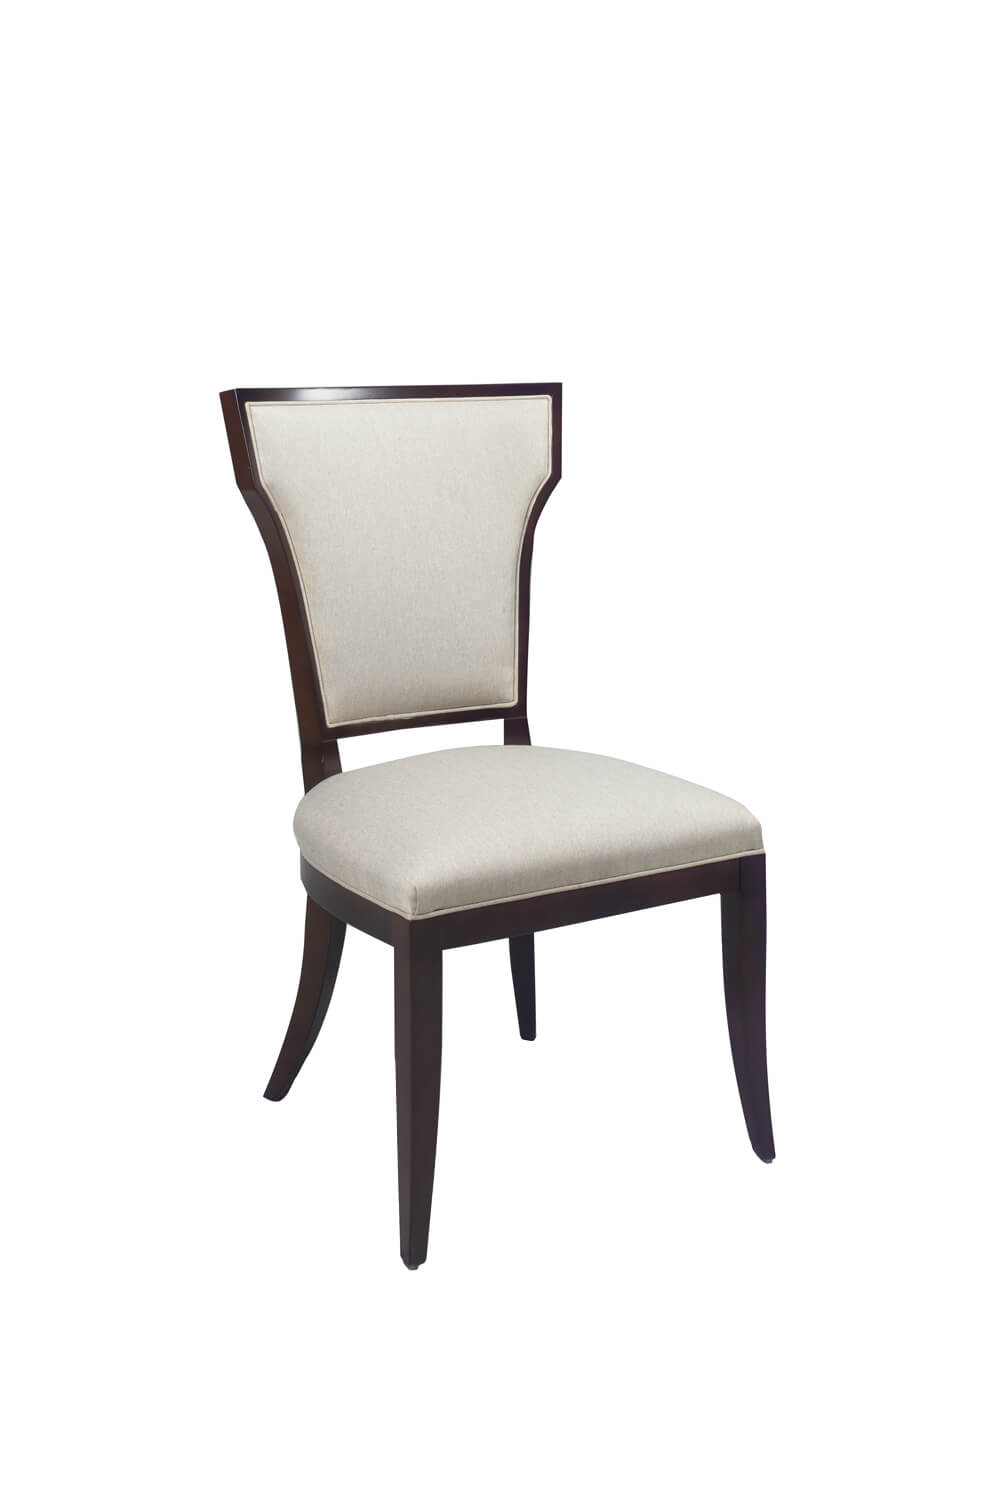 #1205 Modern Upholstered Wood Dining Chair